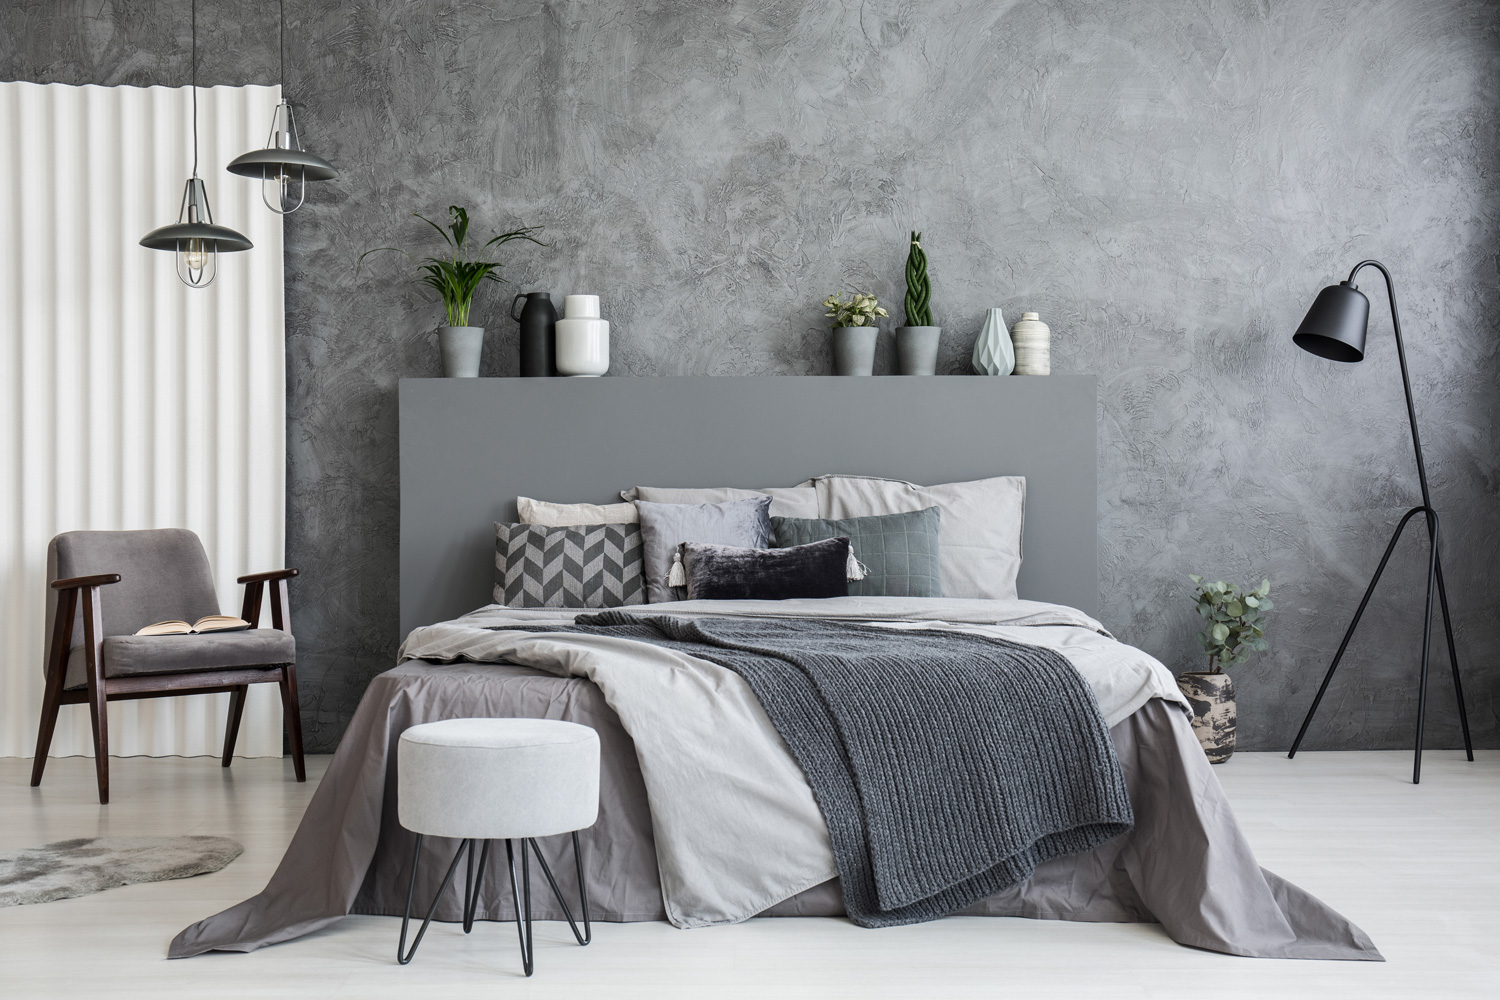 Grey stool in front of bed with blankets and cushions in dark hotel bedroom interior.